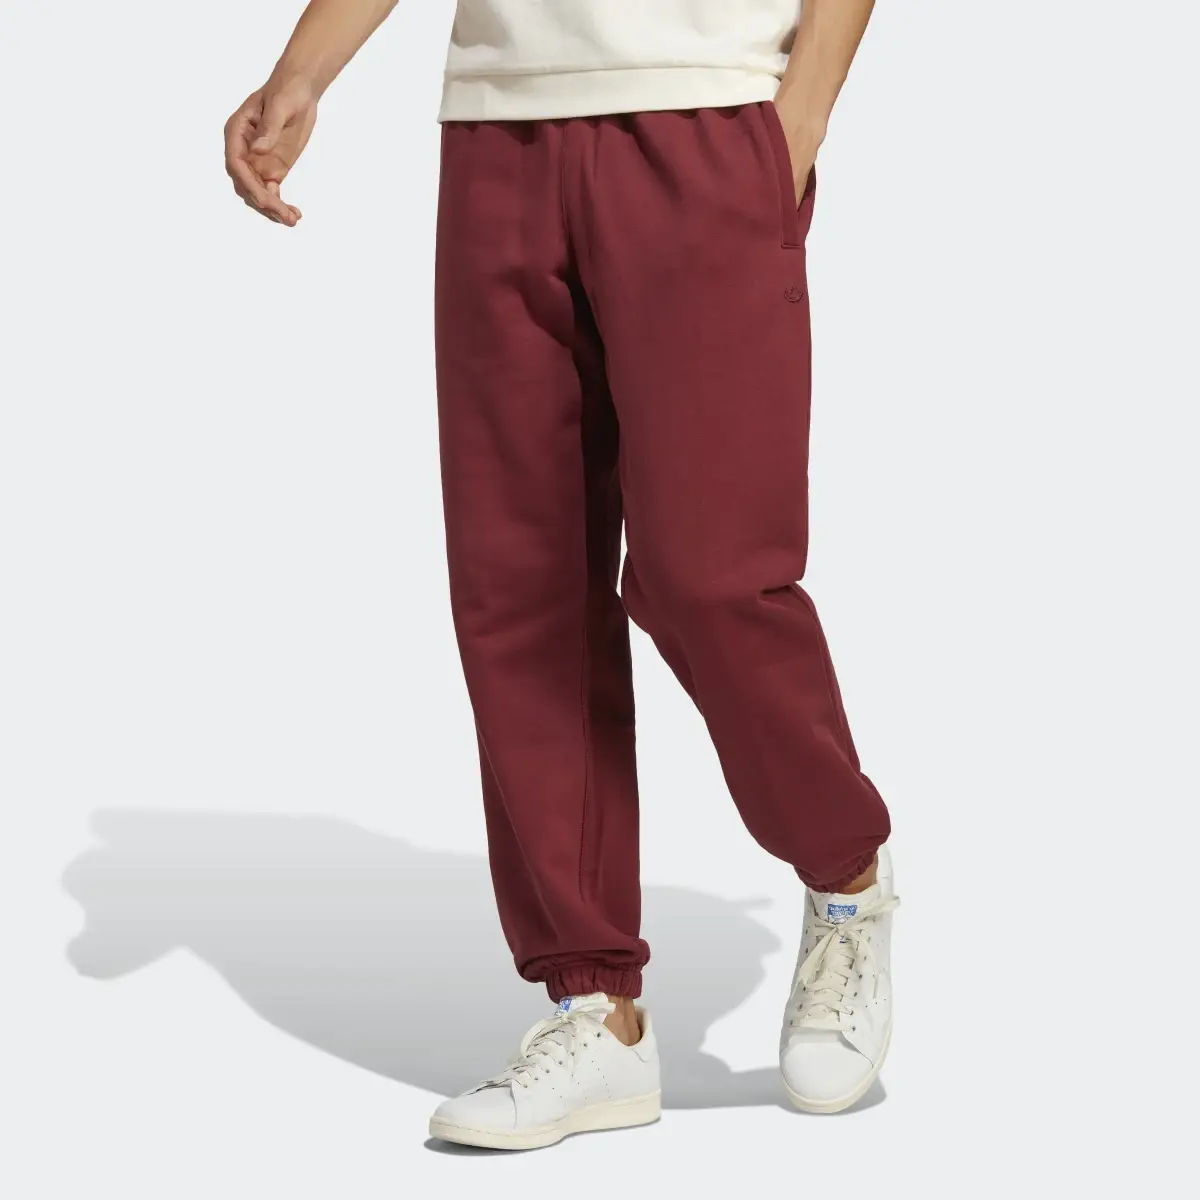 Adidas Adicolor Contempo French Terry Sweat Pants. 1